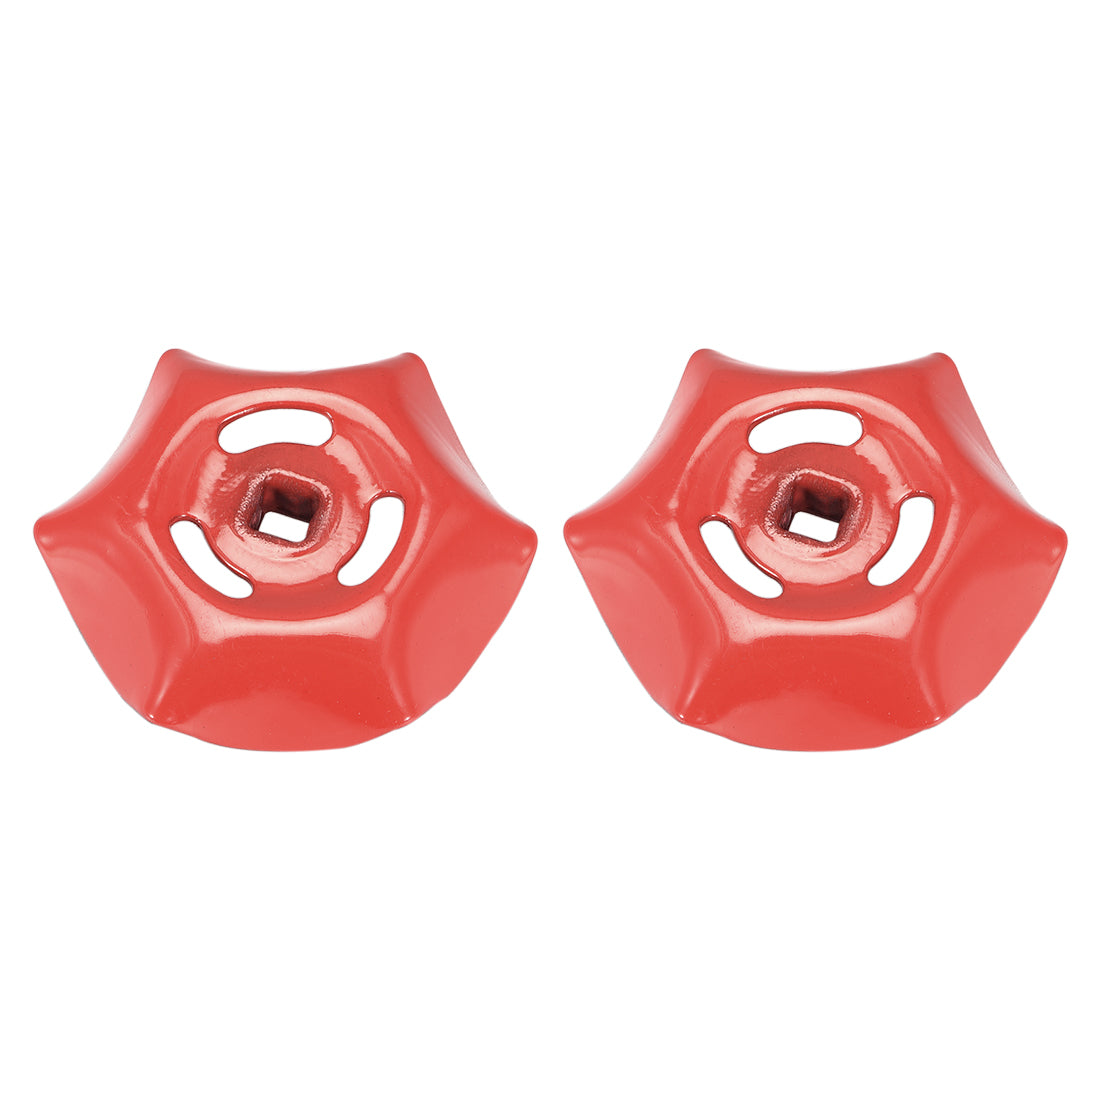 uxcell Uxcell Round Wheel Handle, Square Broach 6x6mm, Wheel OD 59mm Paint Iron Red 2Pcs